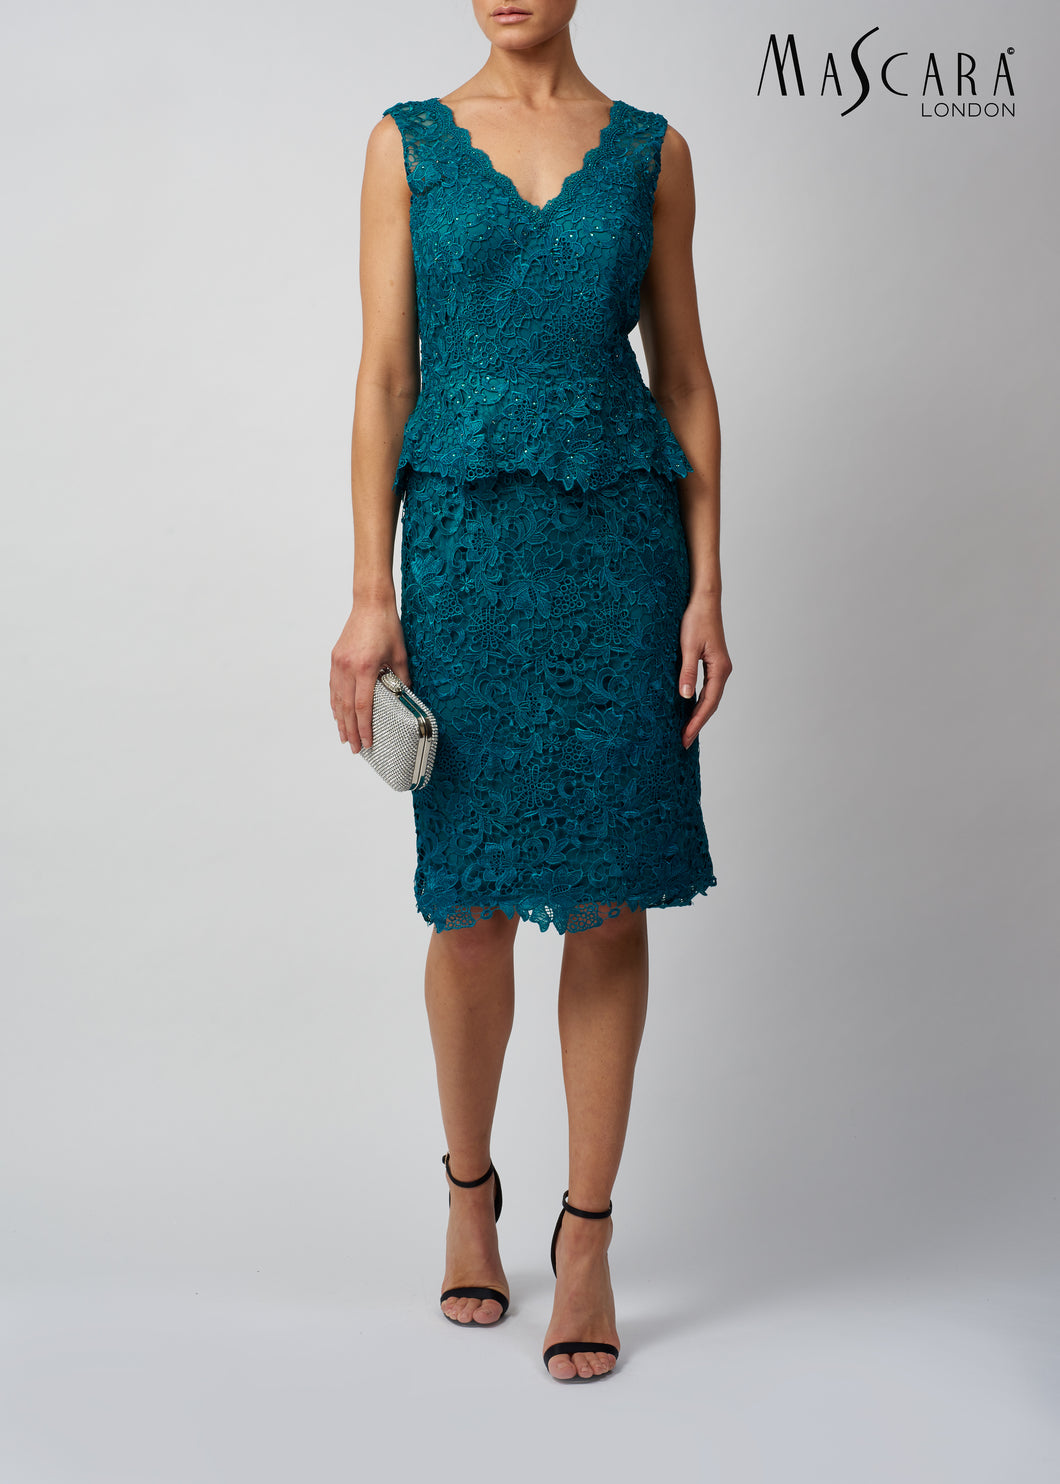 Teal mother of the bride outfit